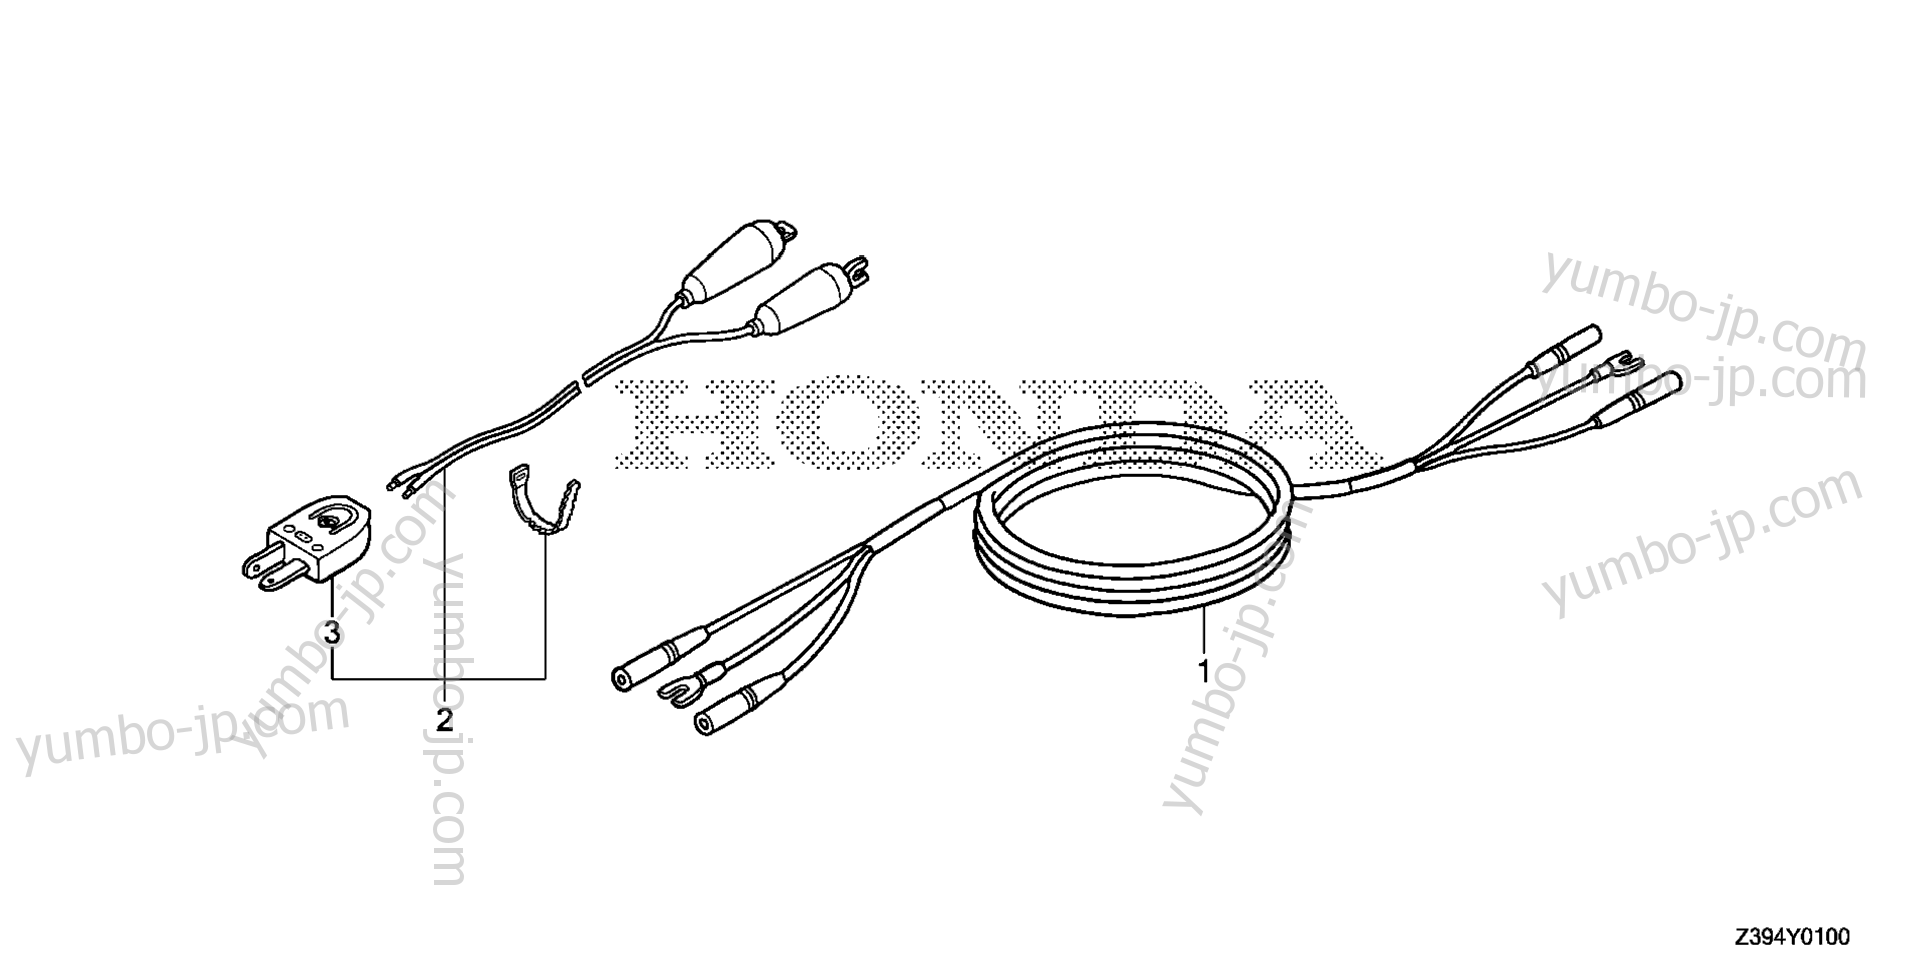 PARALLEL CABLE KIT / CHARGE CORD for Generators HONDA EU2000IT1 A4 